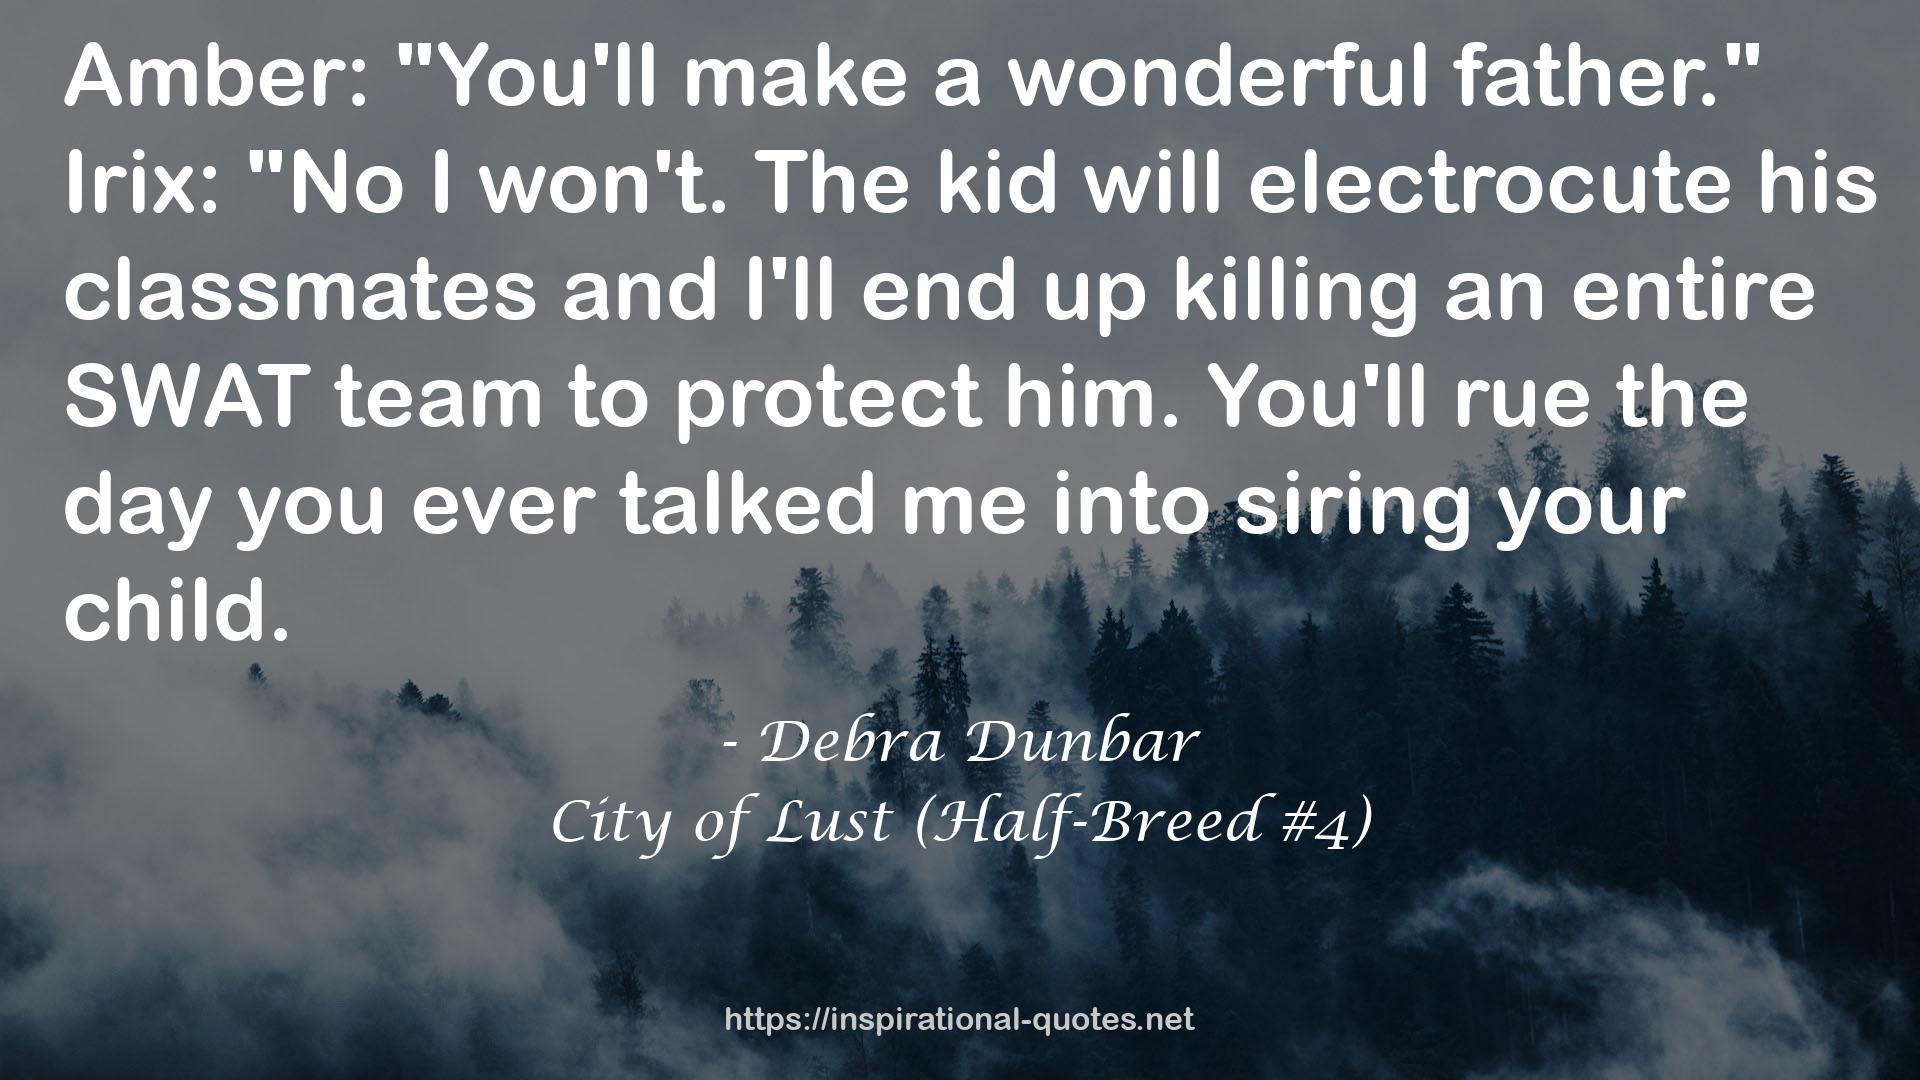 City of Lust (Half-Breed #4) QUOTES